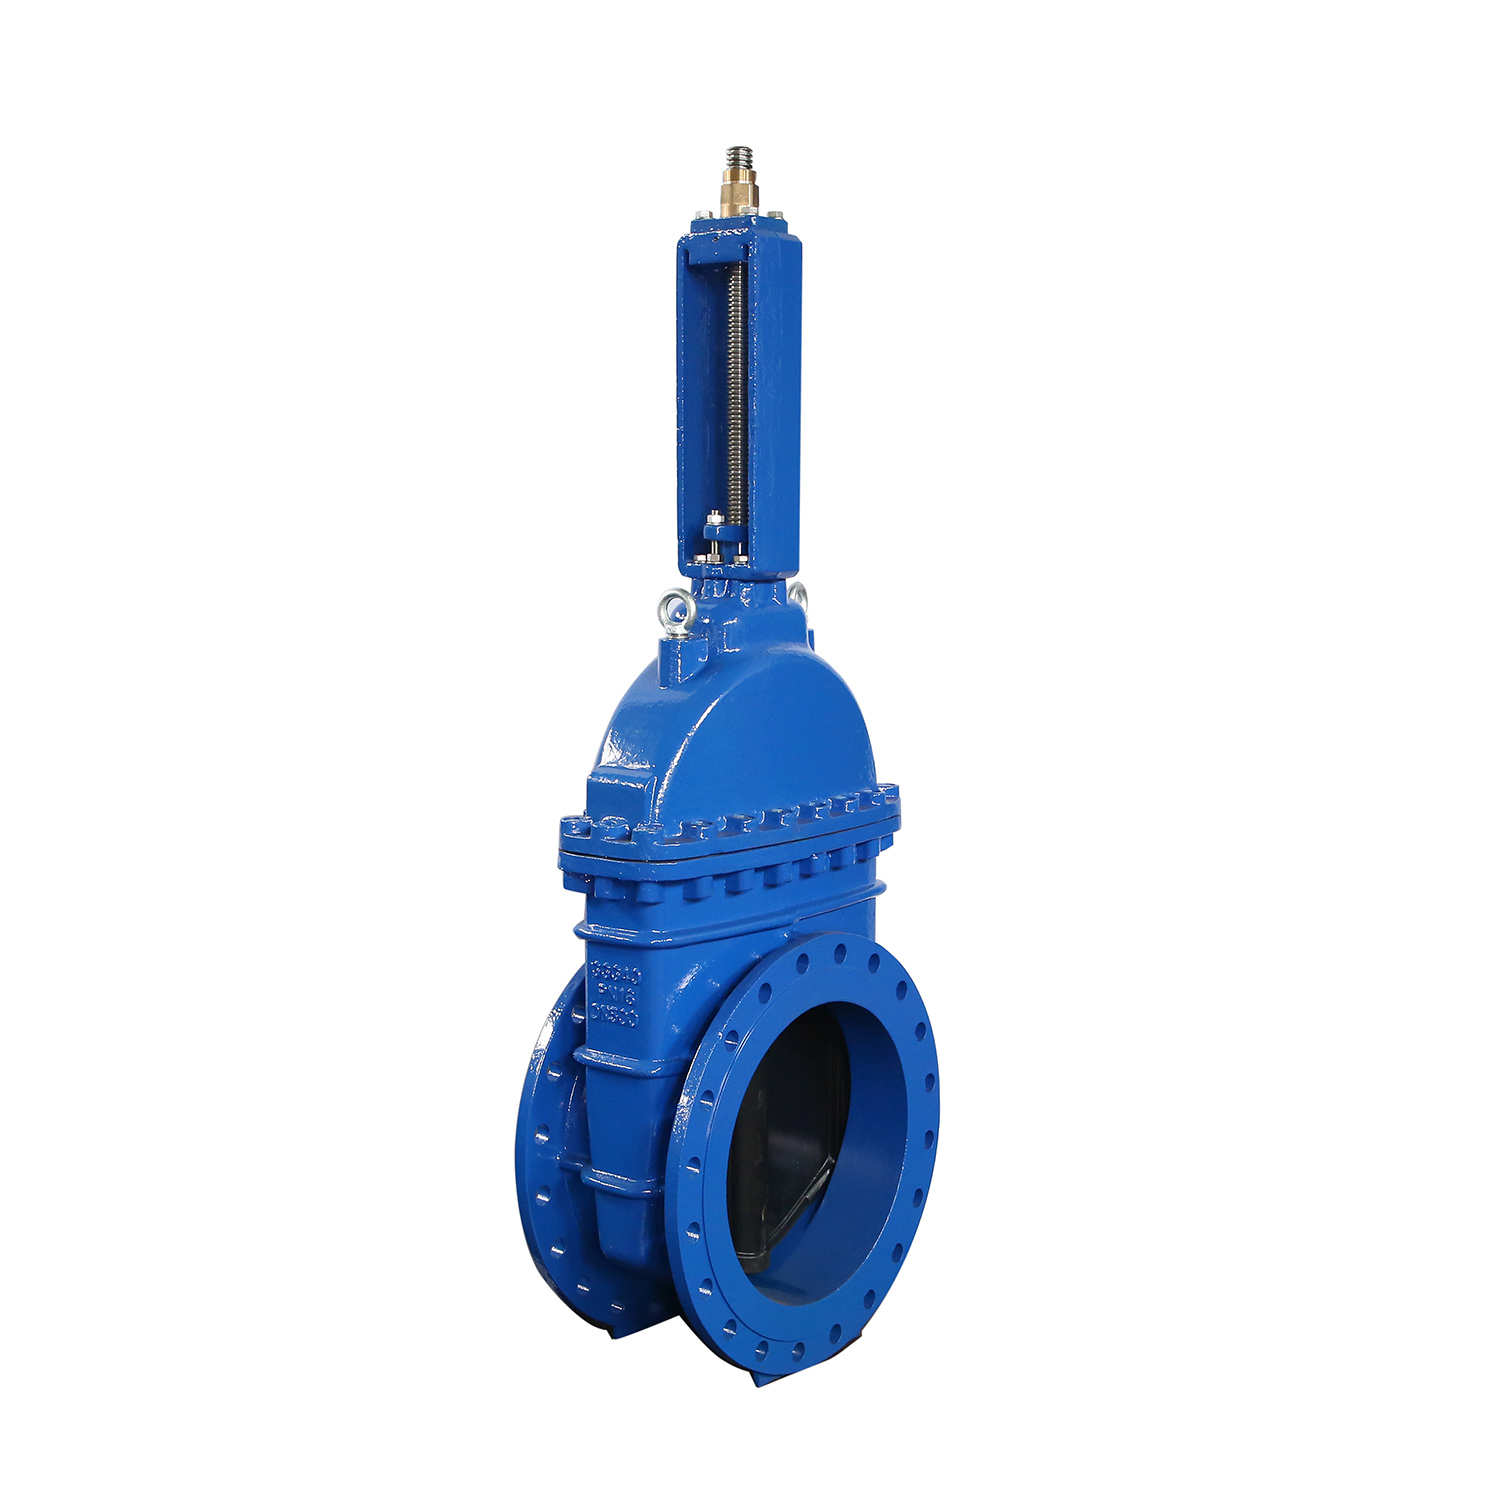 Soft seal ( resilient seat) gate valve 1